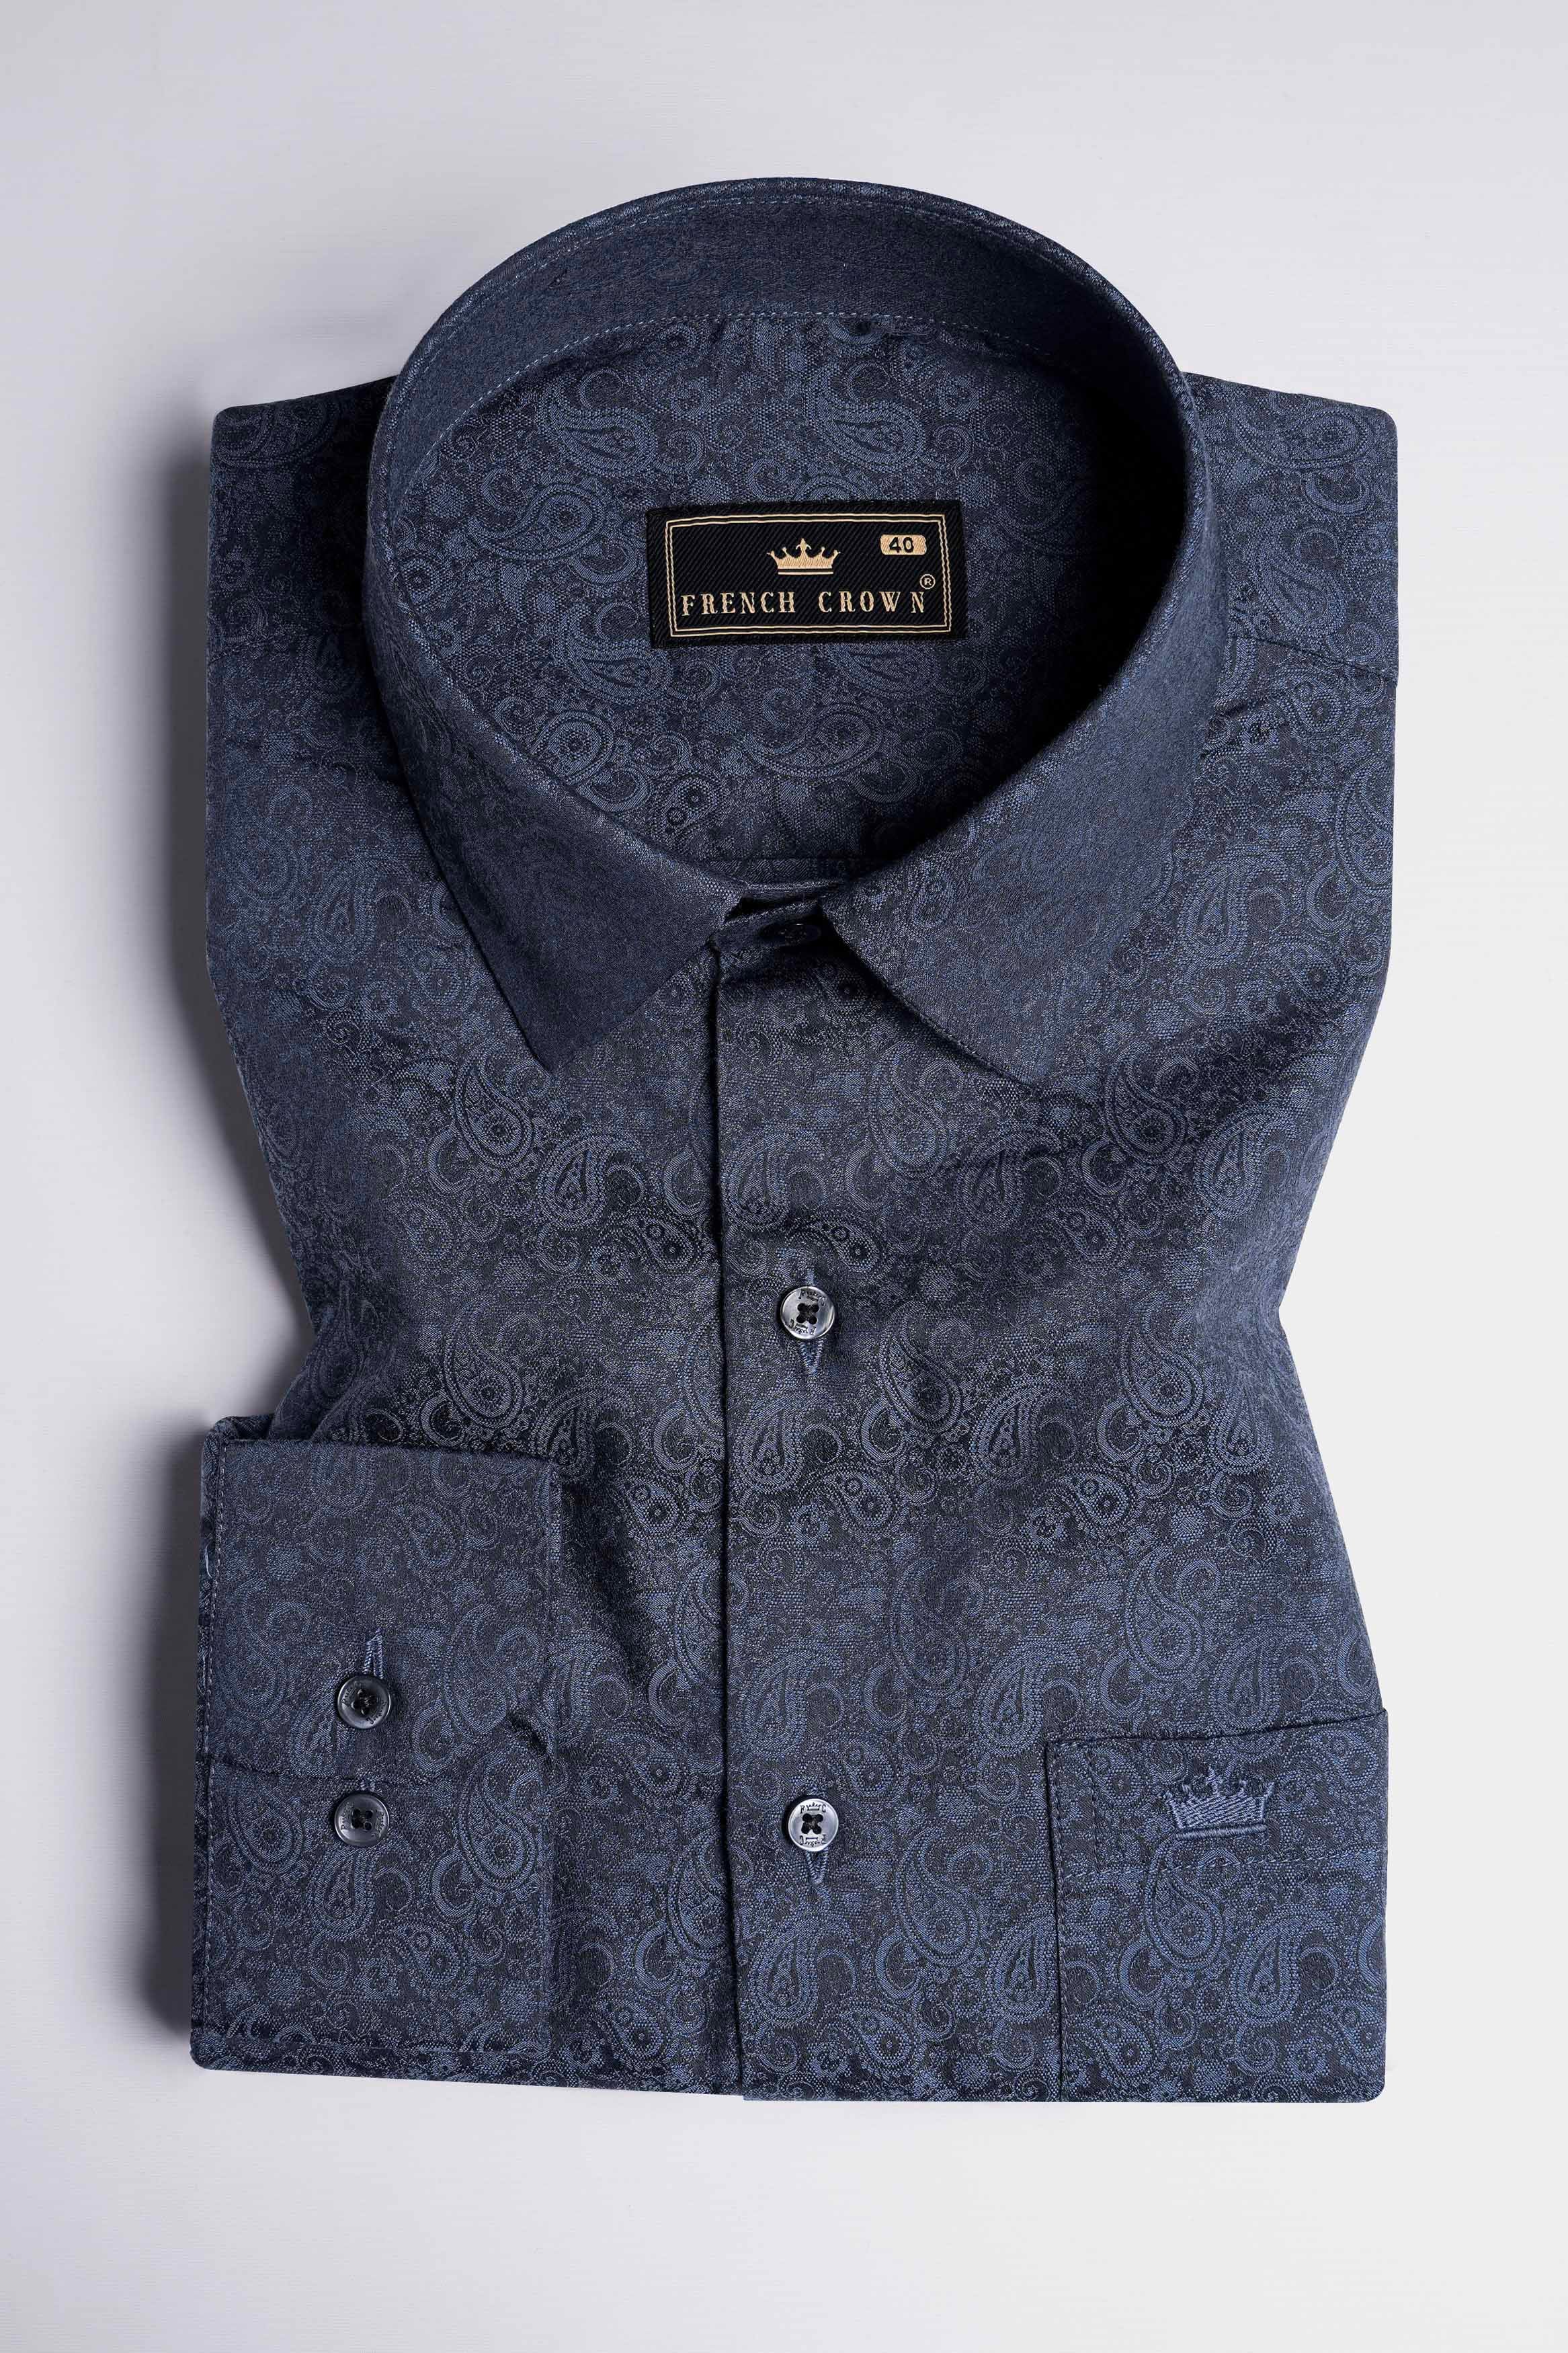 Outer Space Blue and Black Paisley Jacquard Textured Premium Giza Cotton Shirt